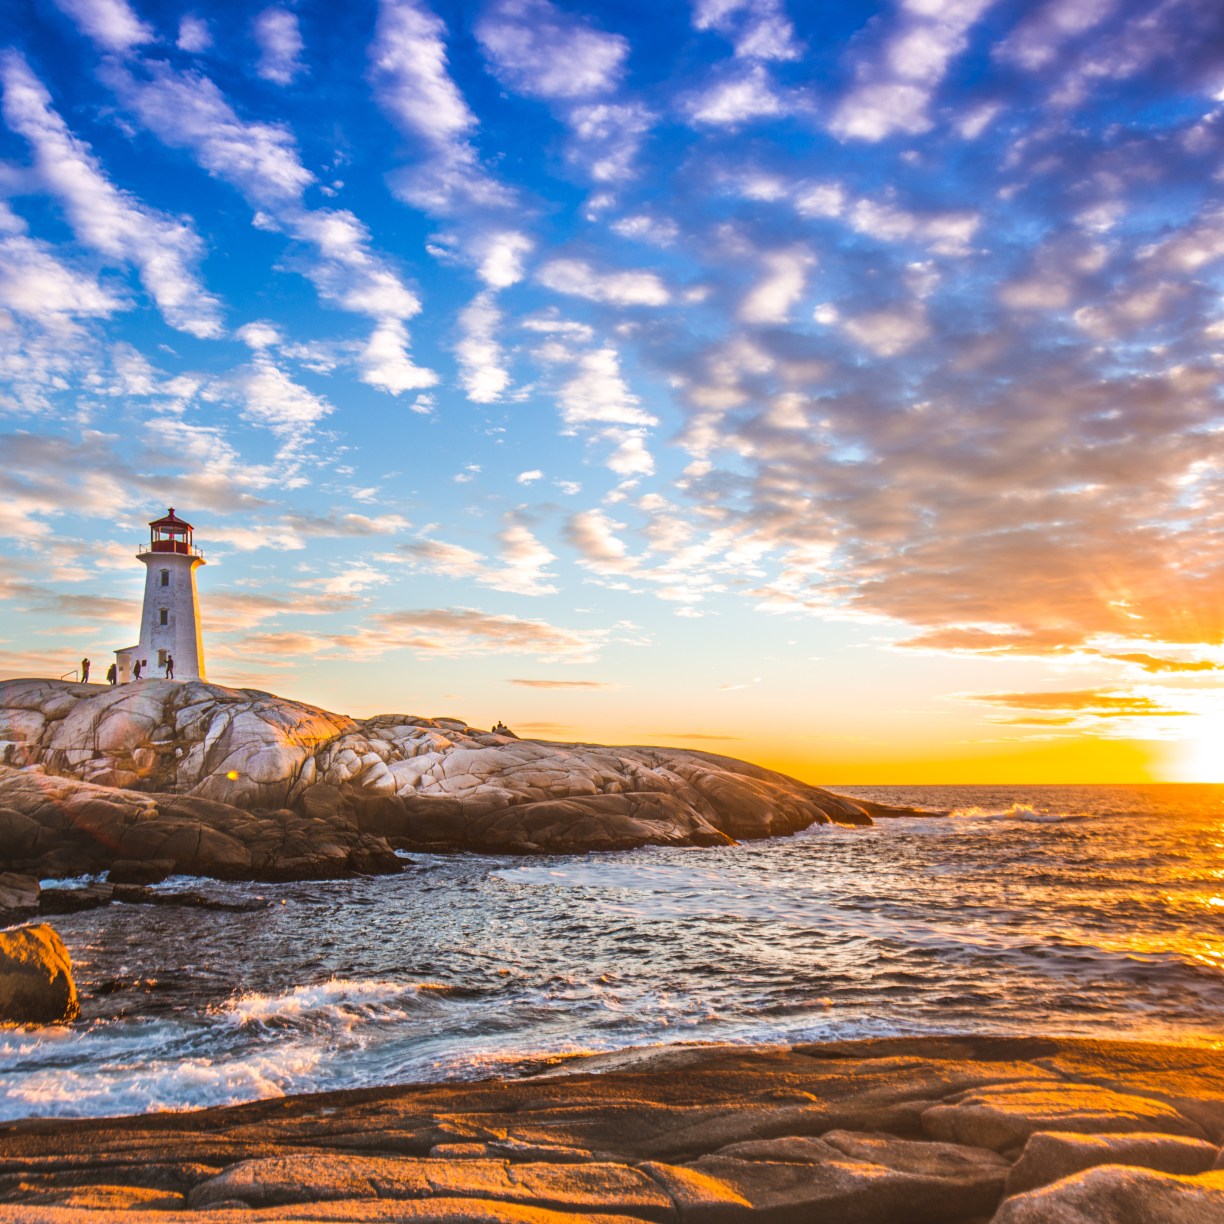 Peggy's Cove Lighthouse Sunset Ocean View Landscape In Halifax Nova